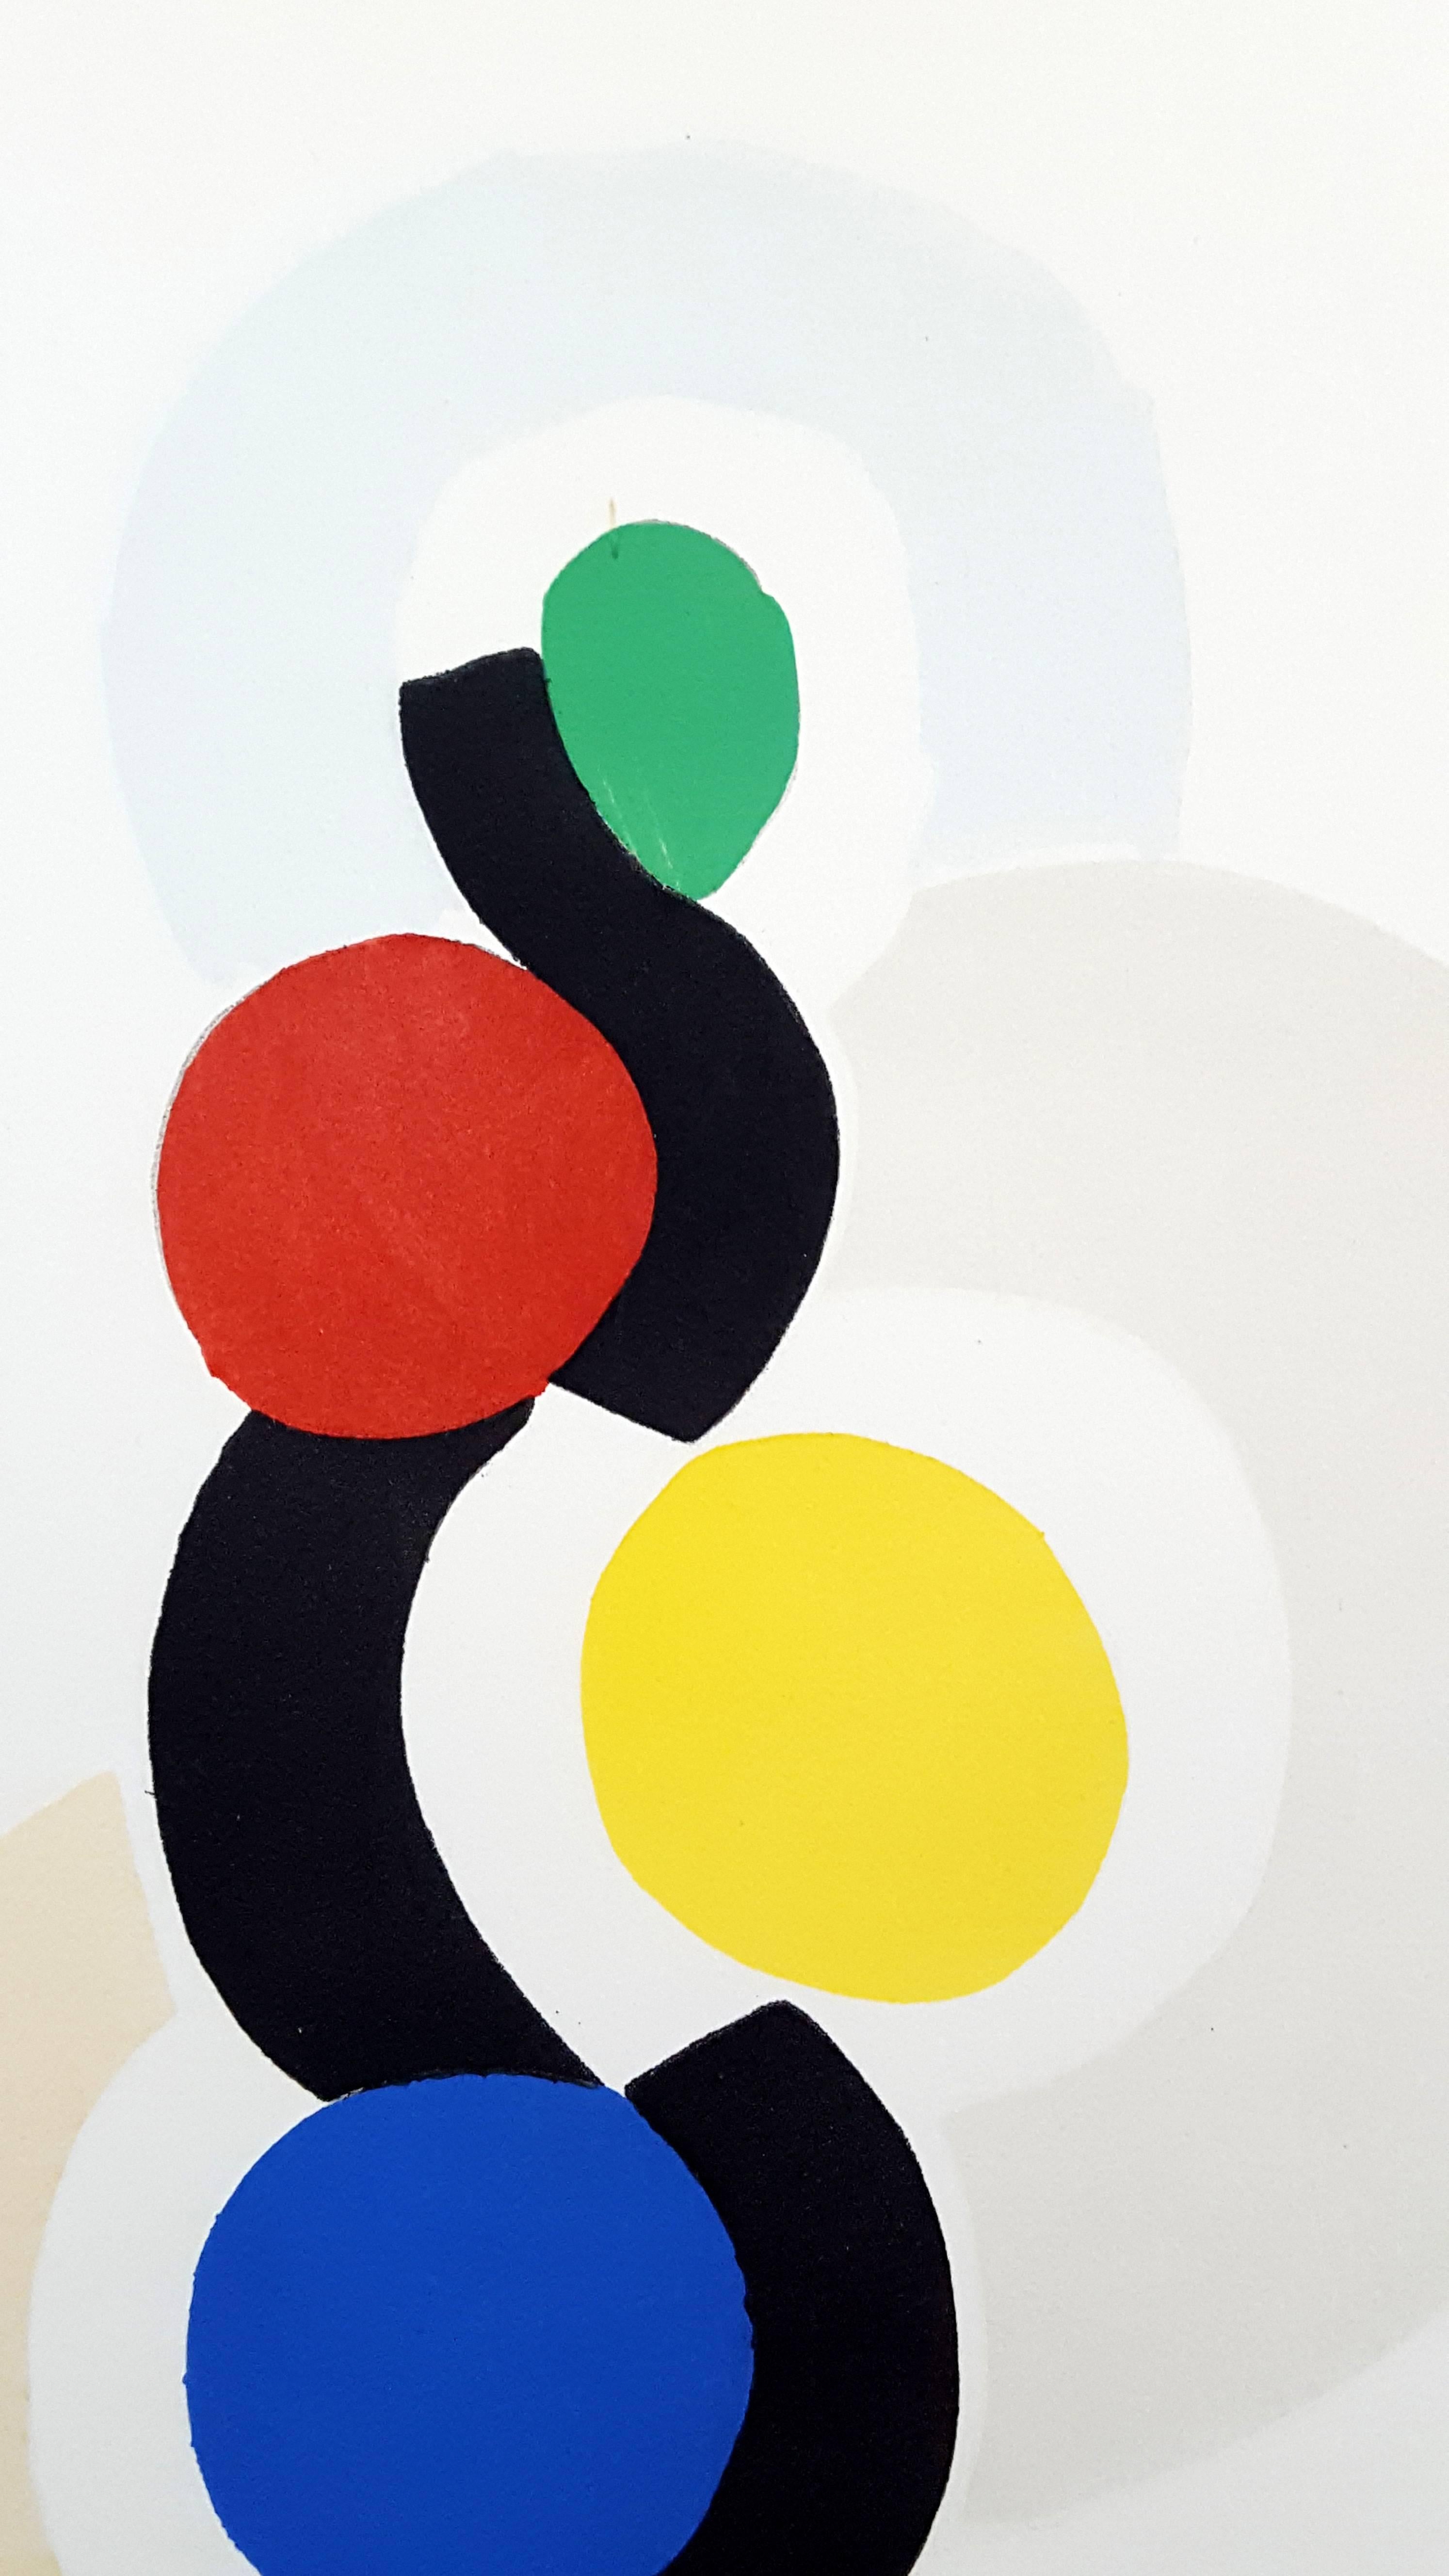  Living Painting - Original Colour Pochoir - Abstract Geometric Print by (after) Sonia Delaunay